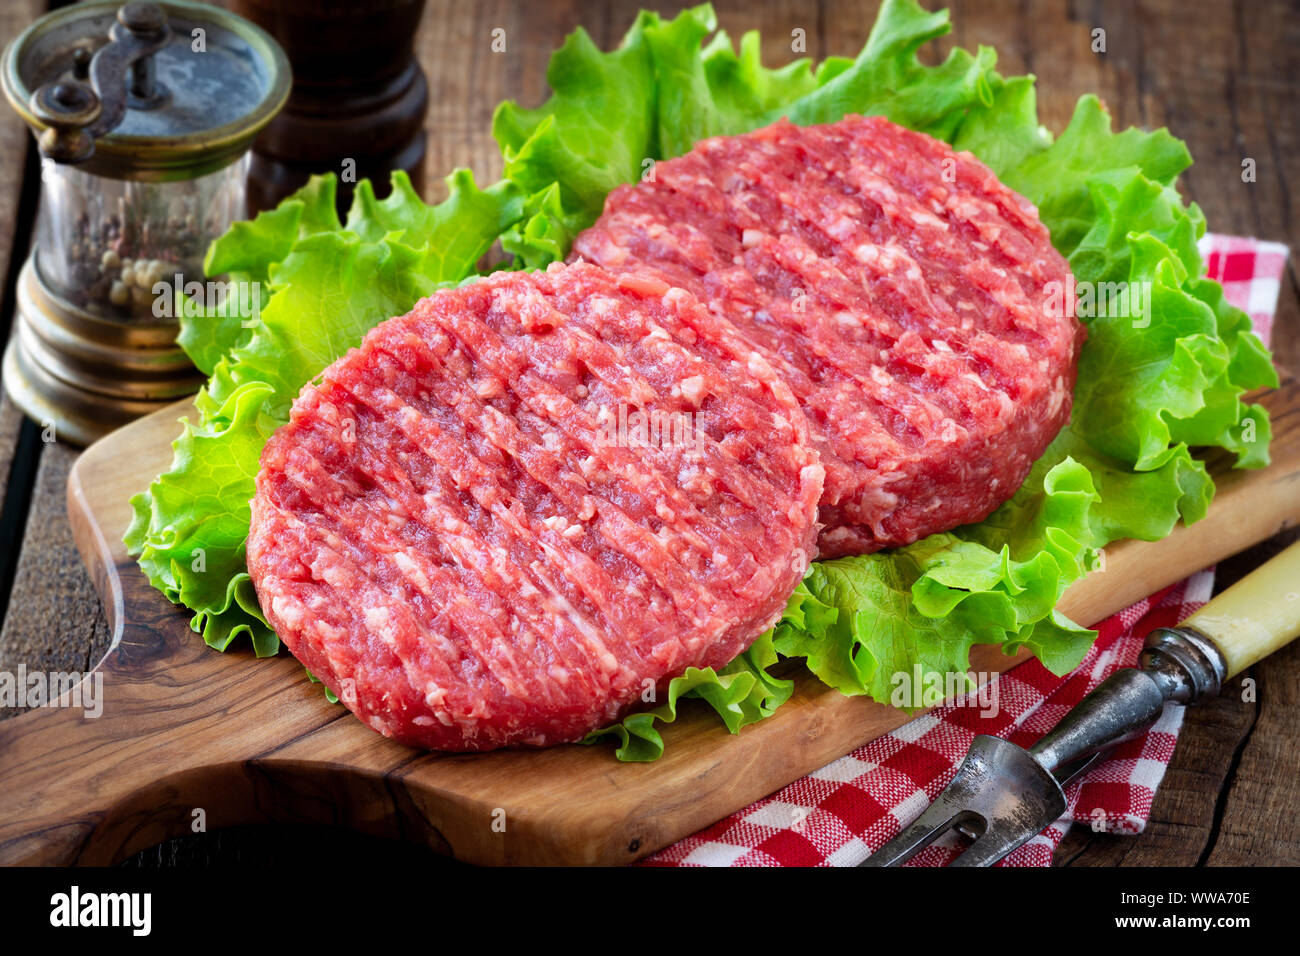 Raw mince meat beef burgers on a wooden cutting board with lettuce leaves Stock Photo